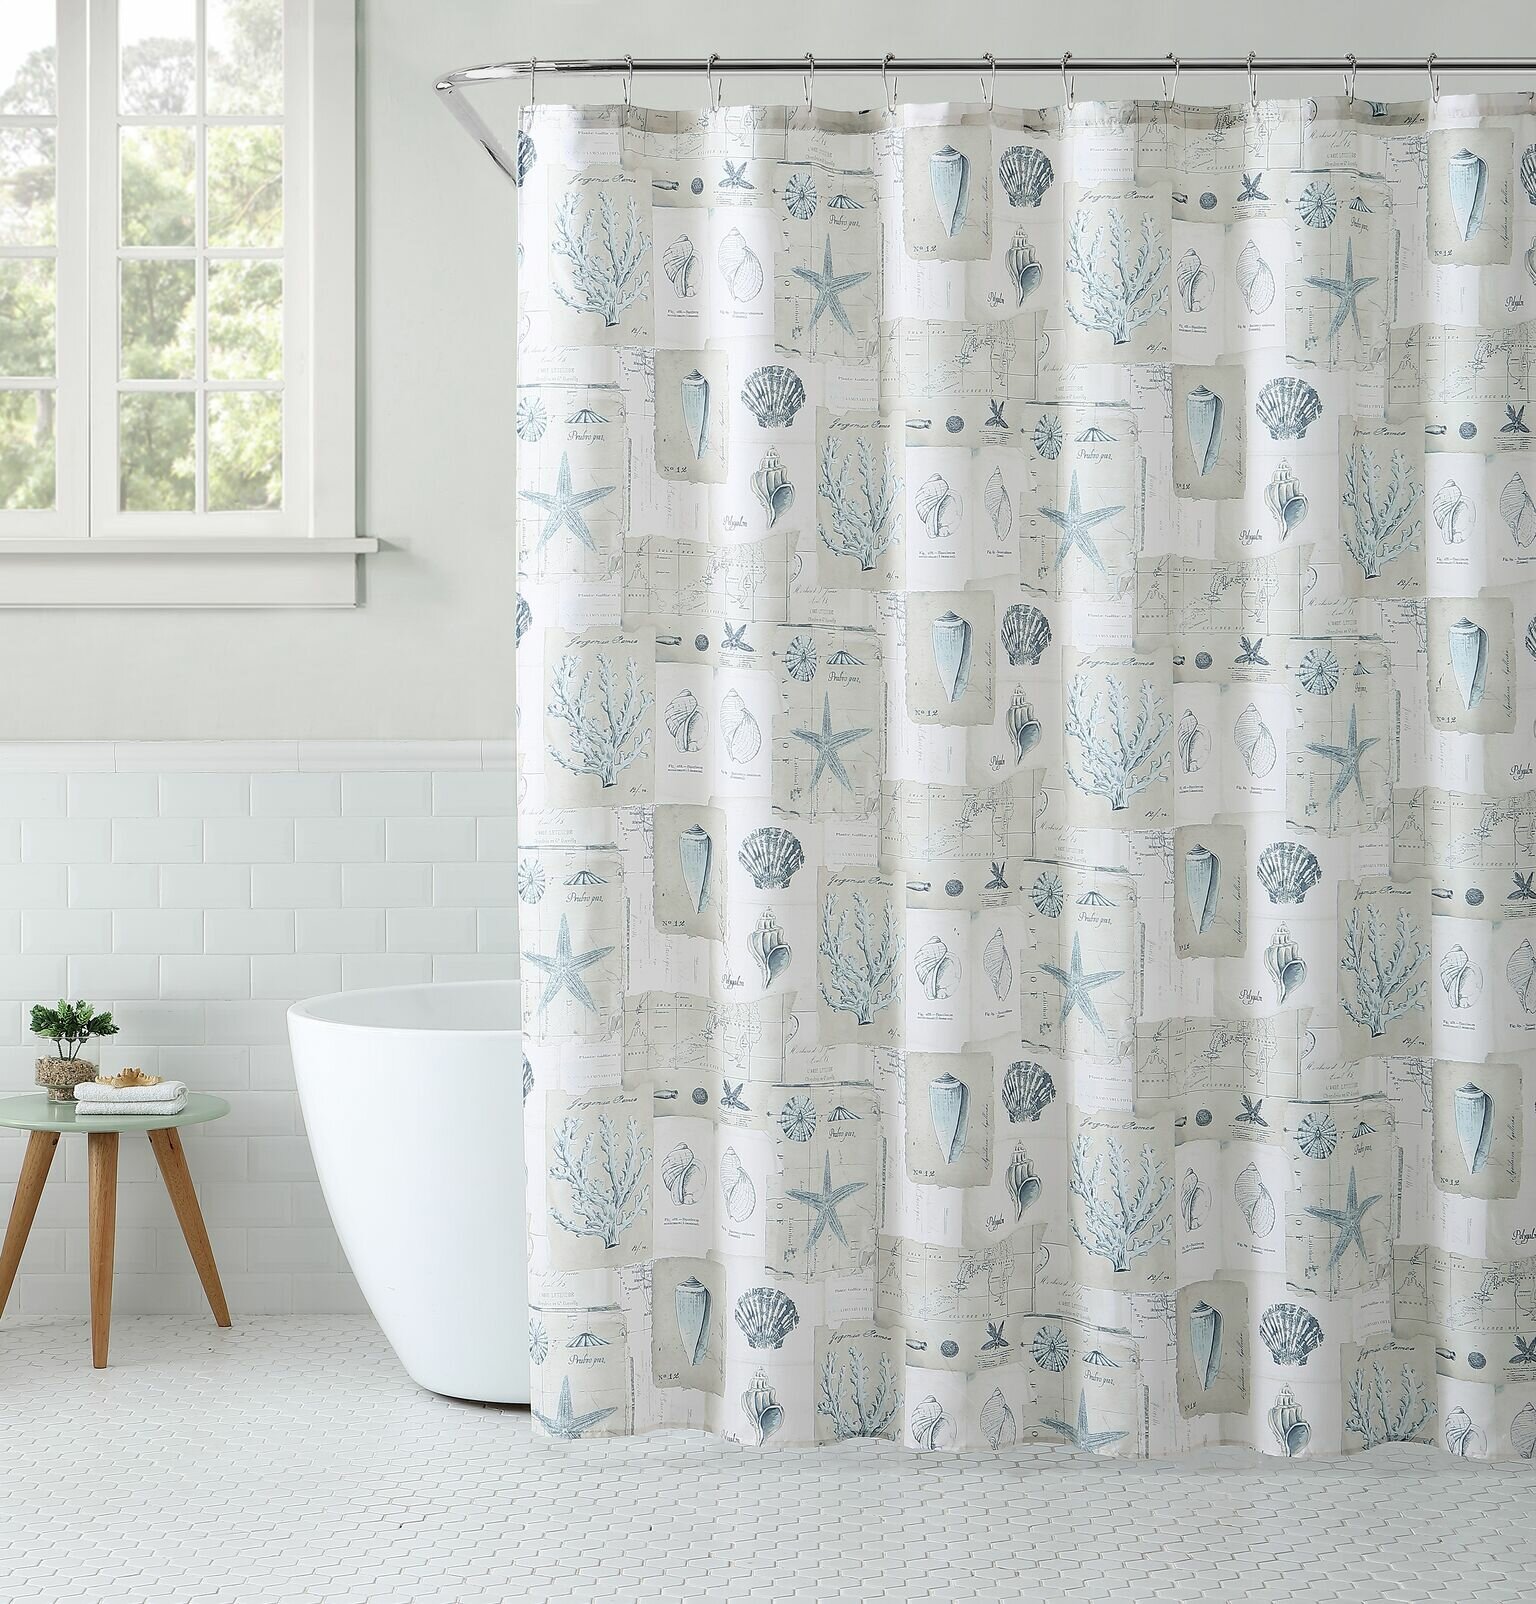 Details about   Coastal Seashells Embroidered Fabric Shower Curtain 